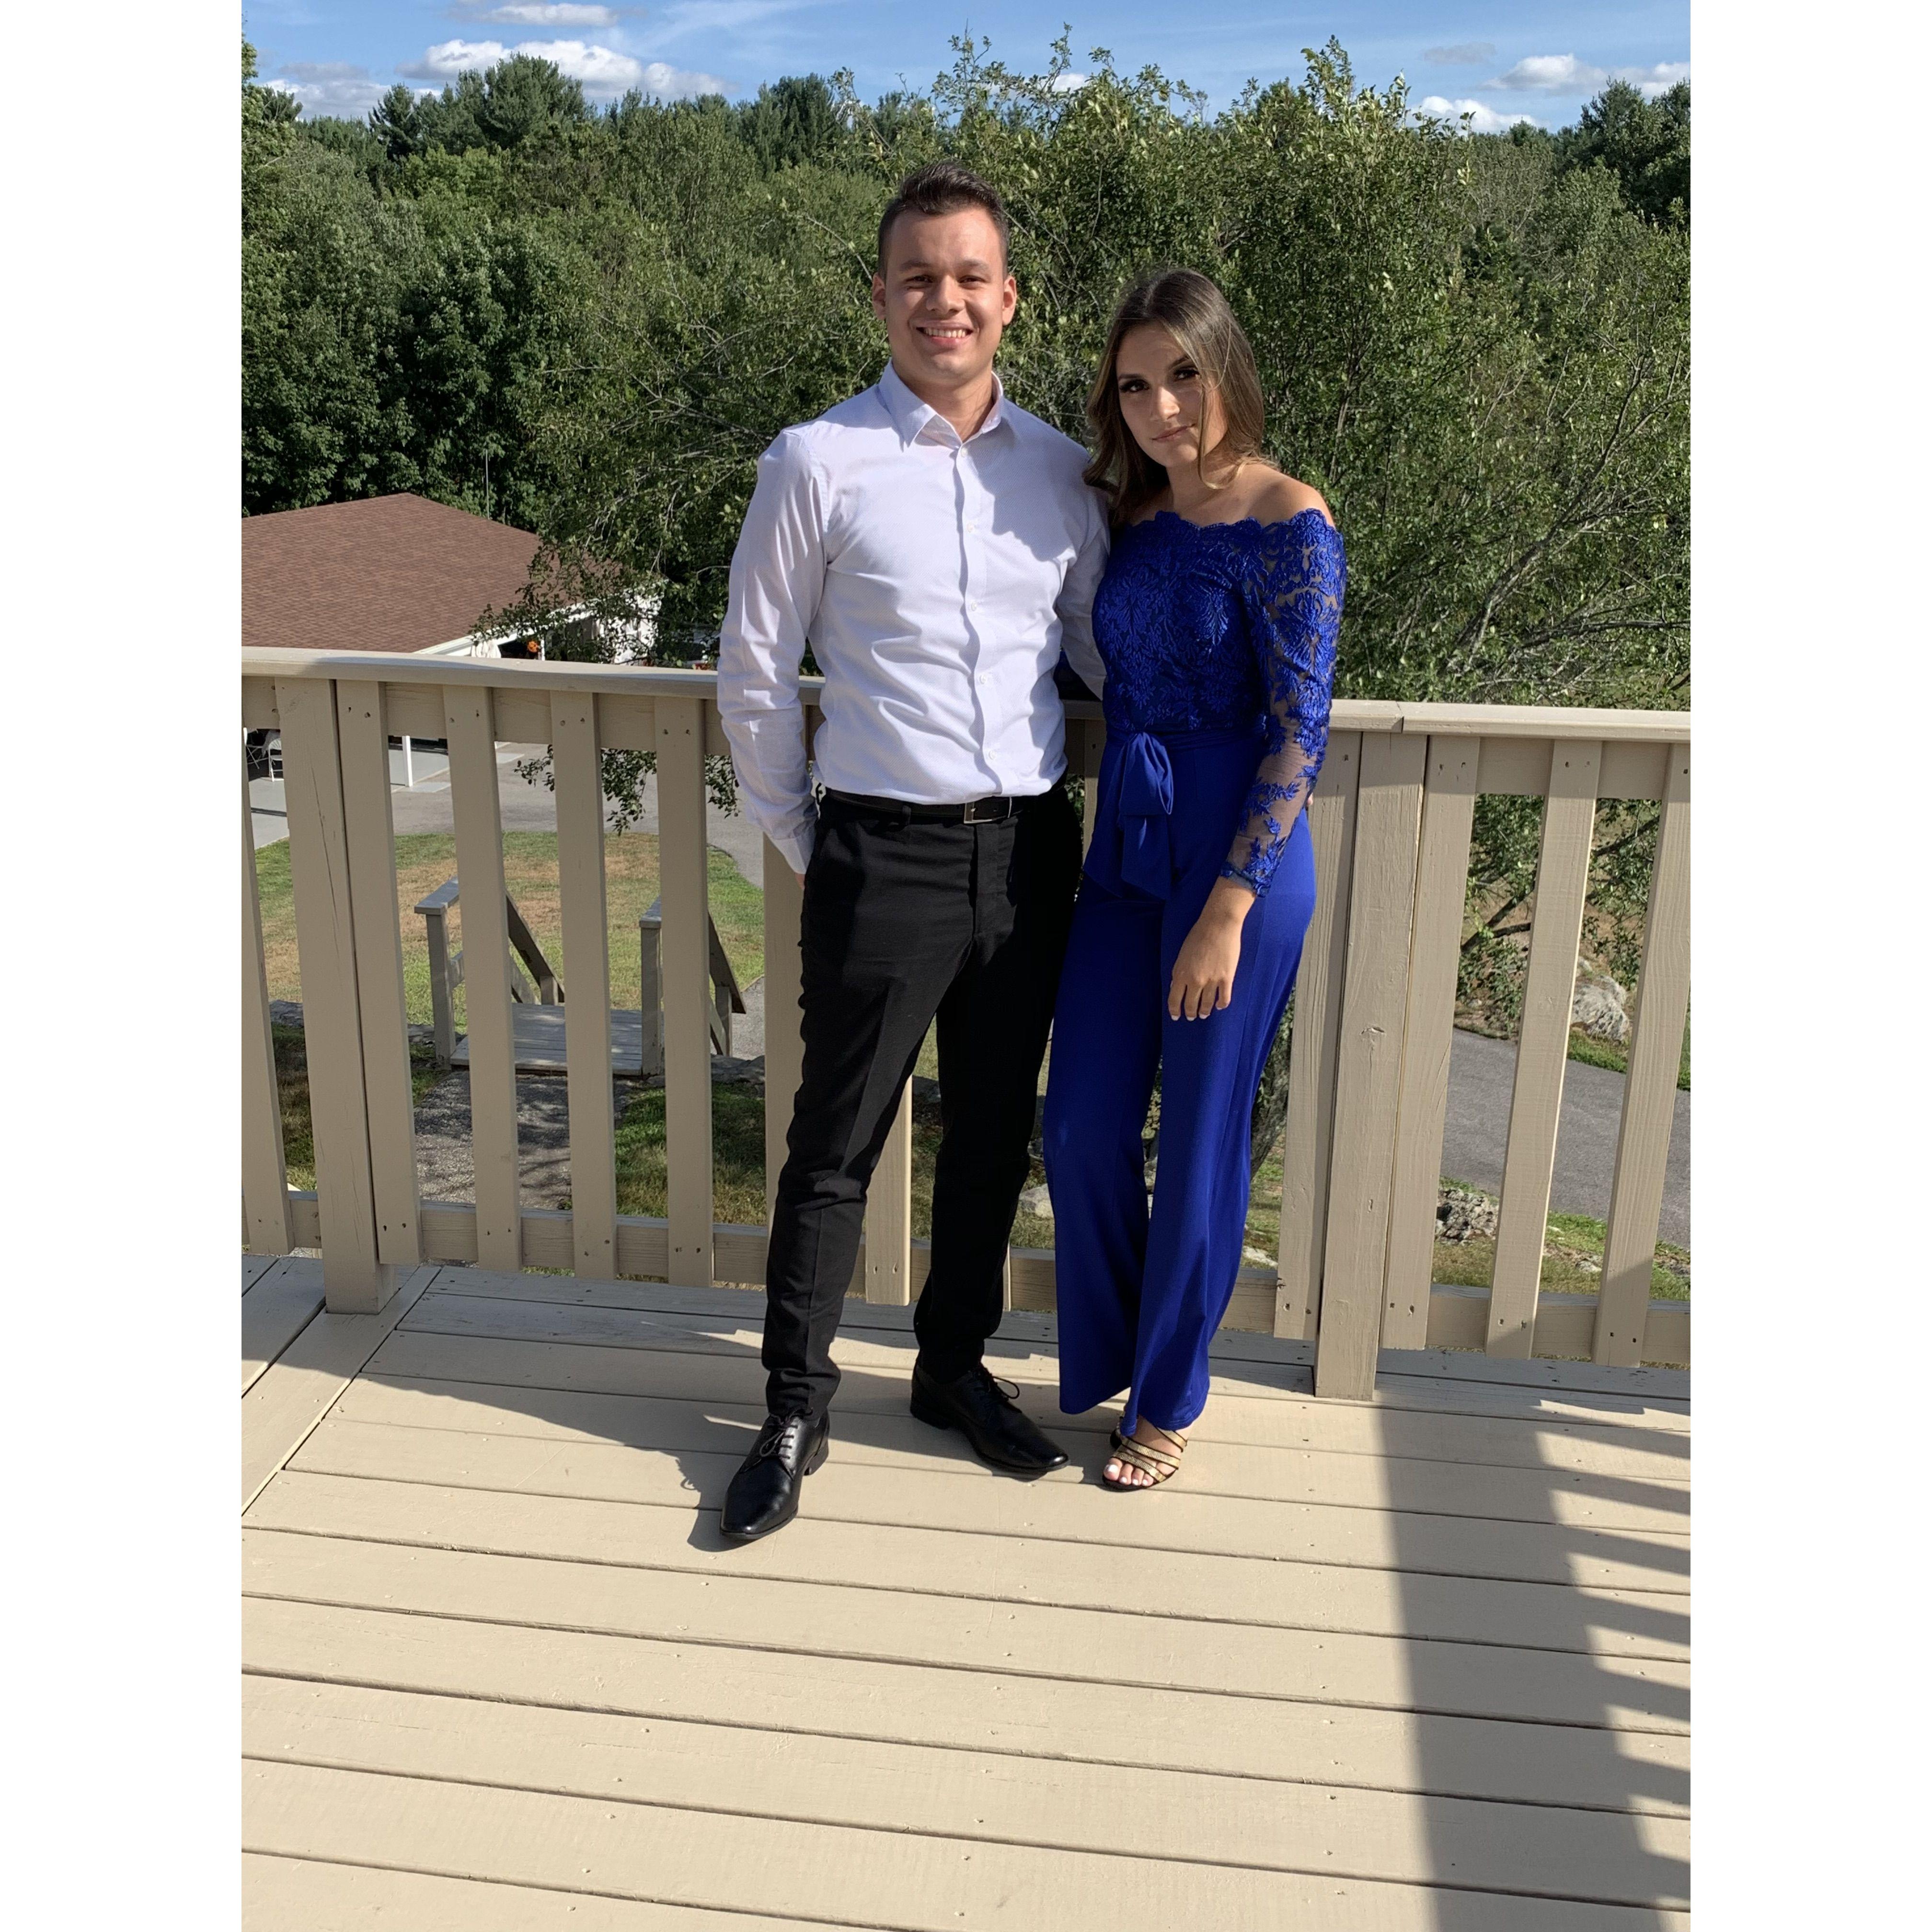 This was Gabriel and Rashel's very first ever picture as friends on August 11, 2019